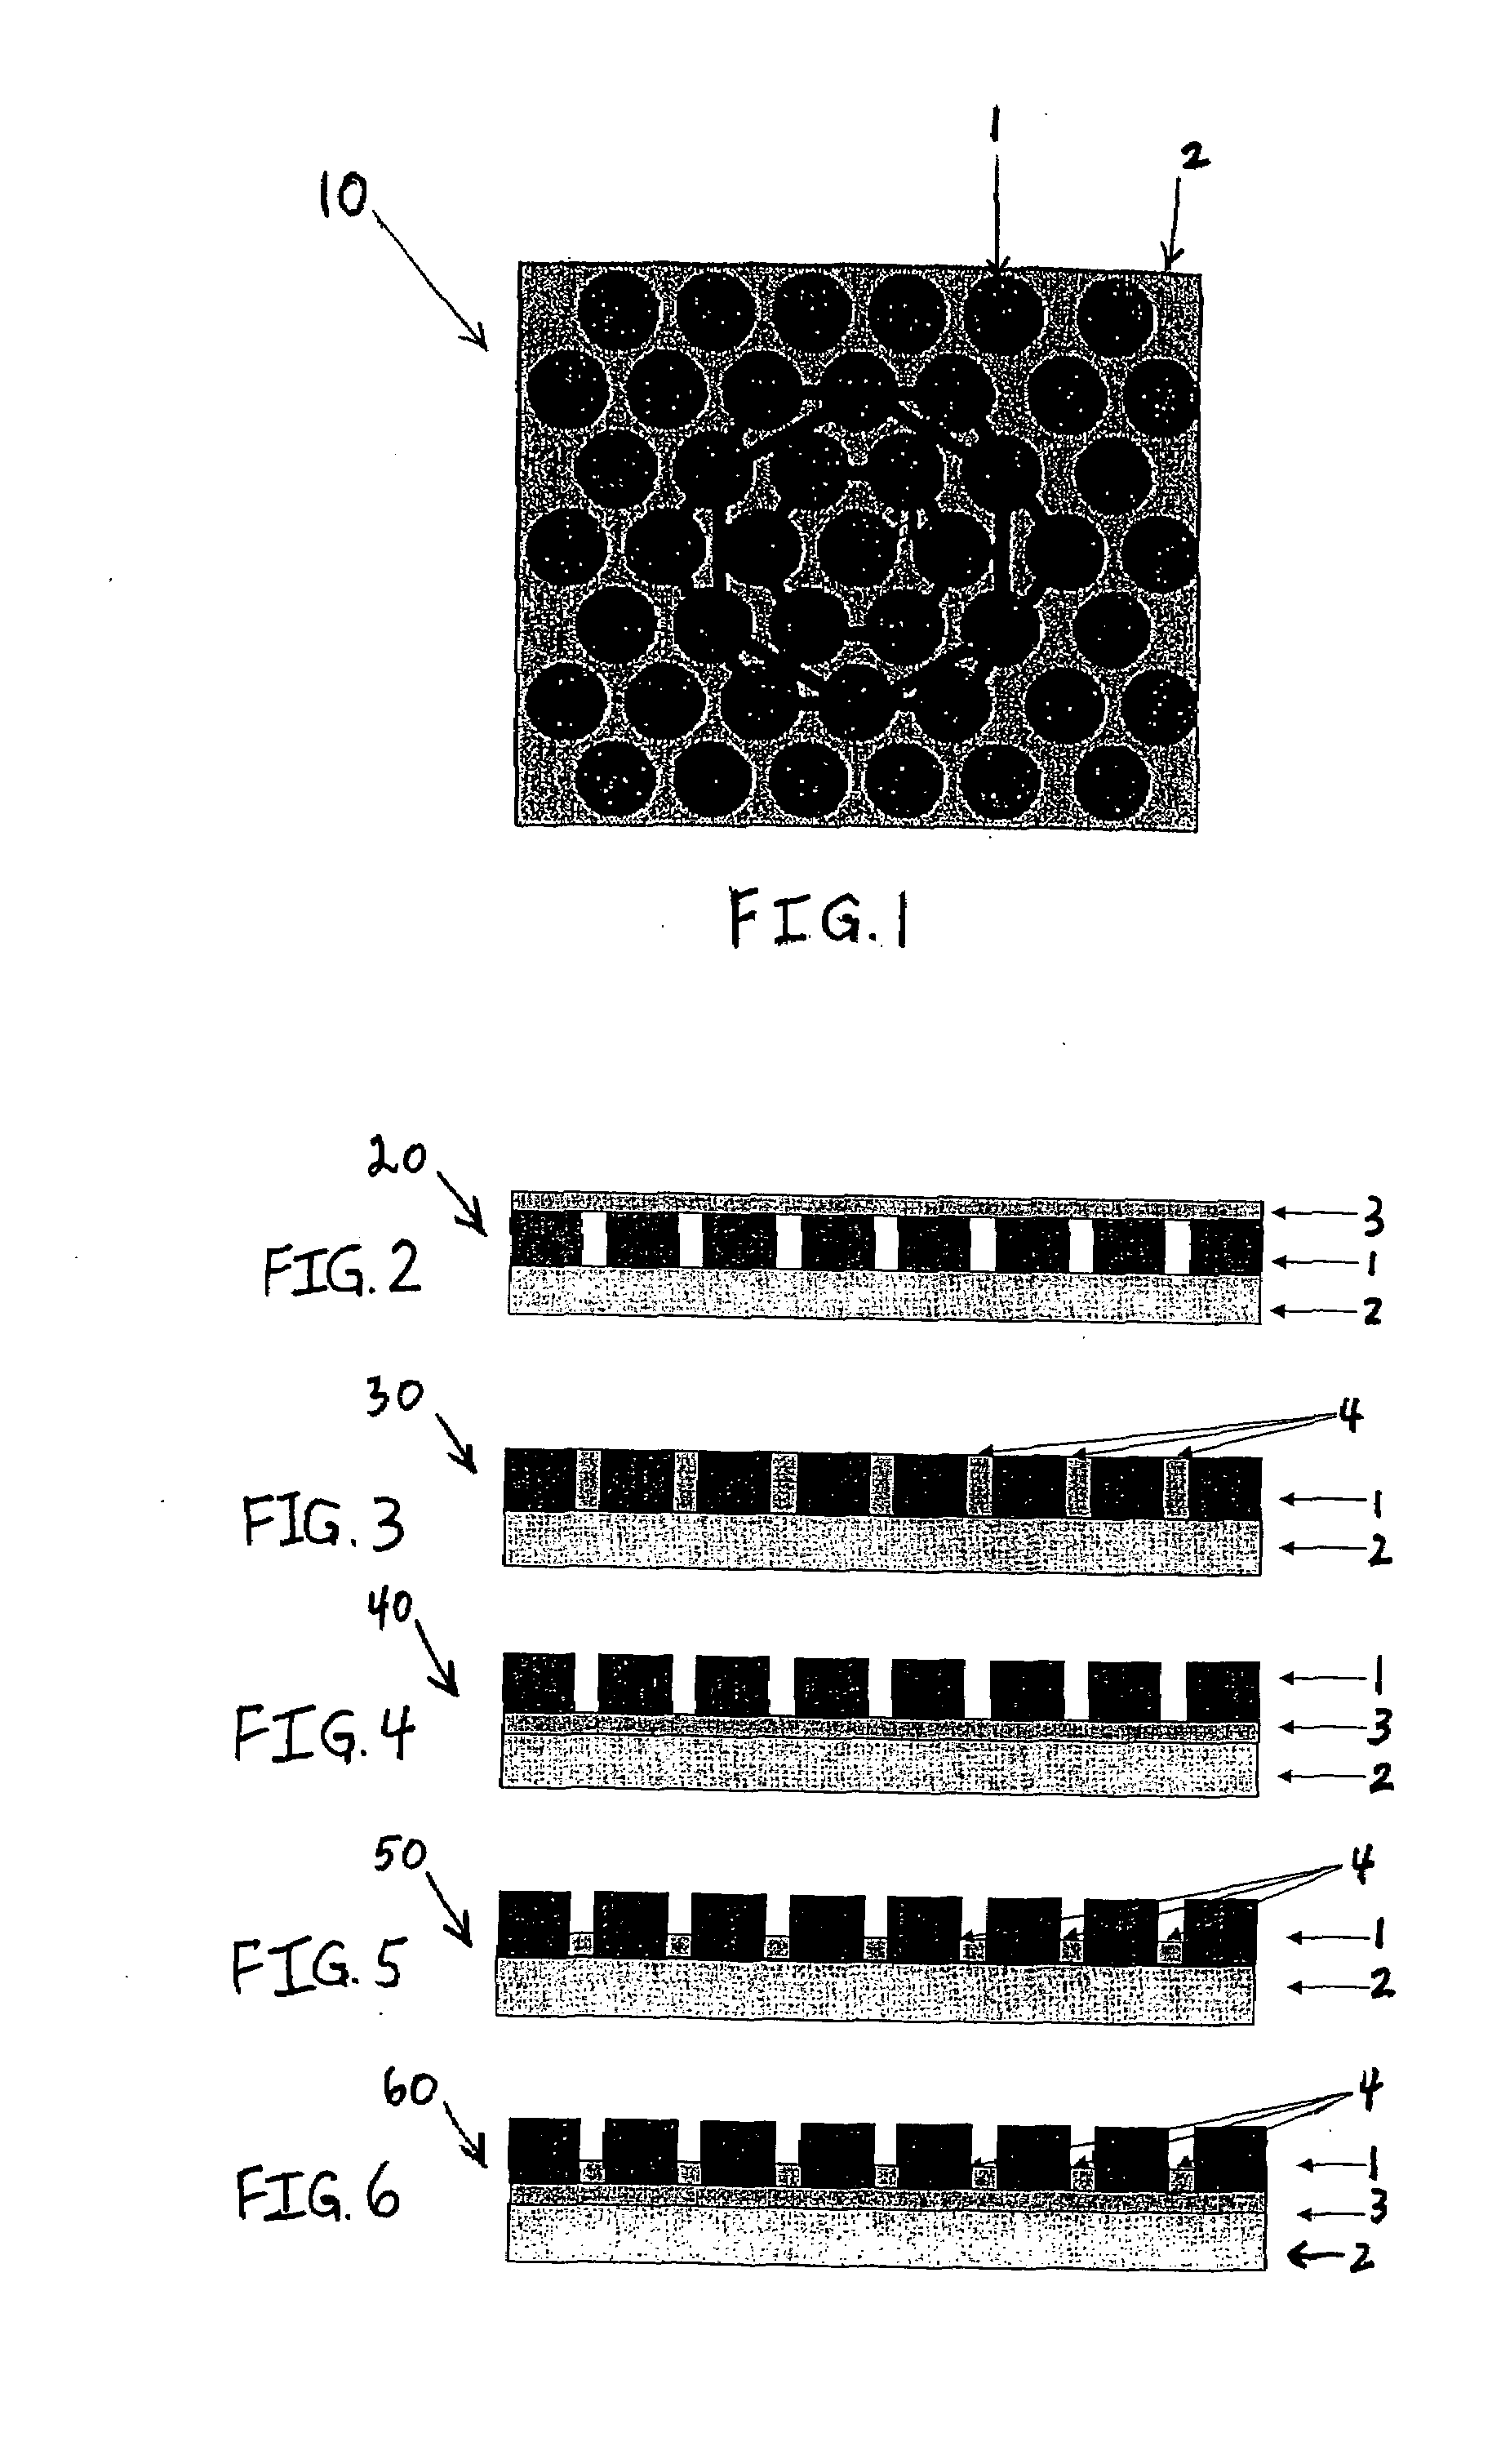 Bit patterned magnetic media with exchange coupling between bits